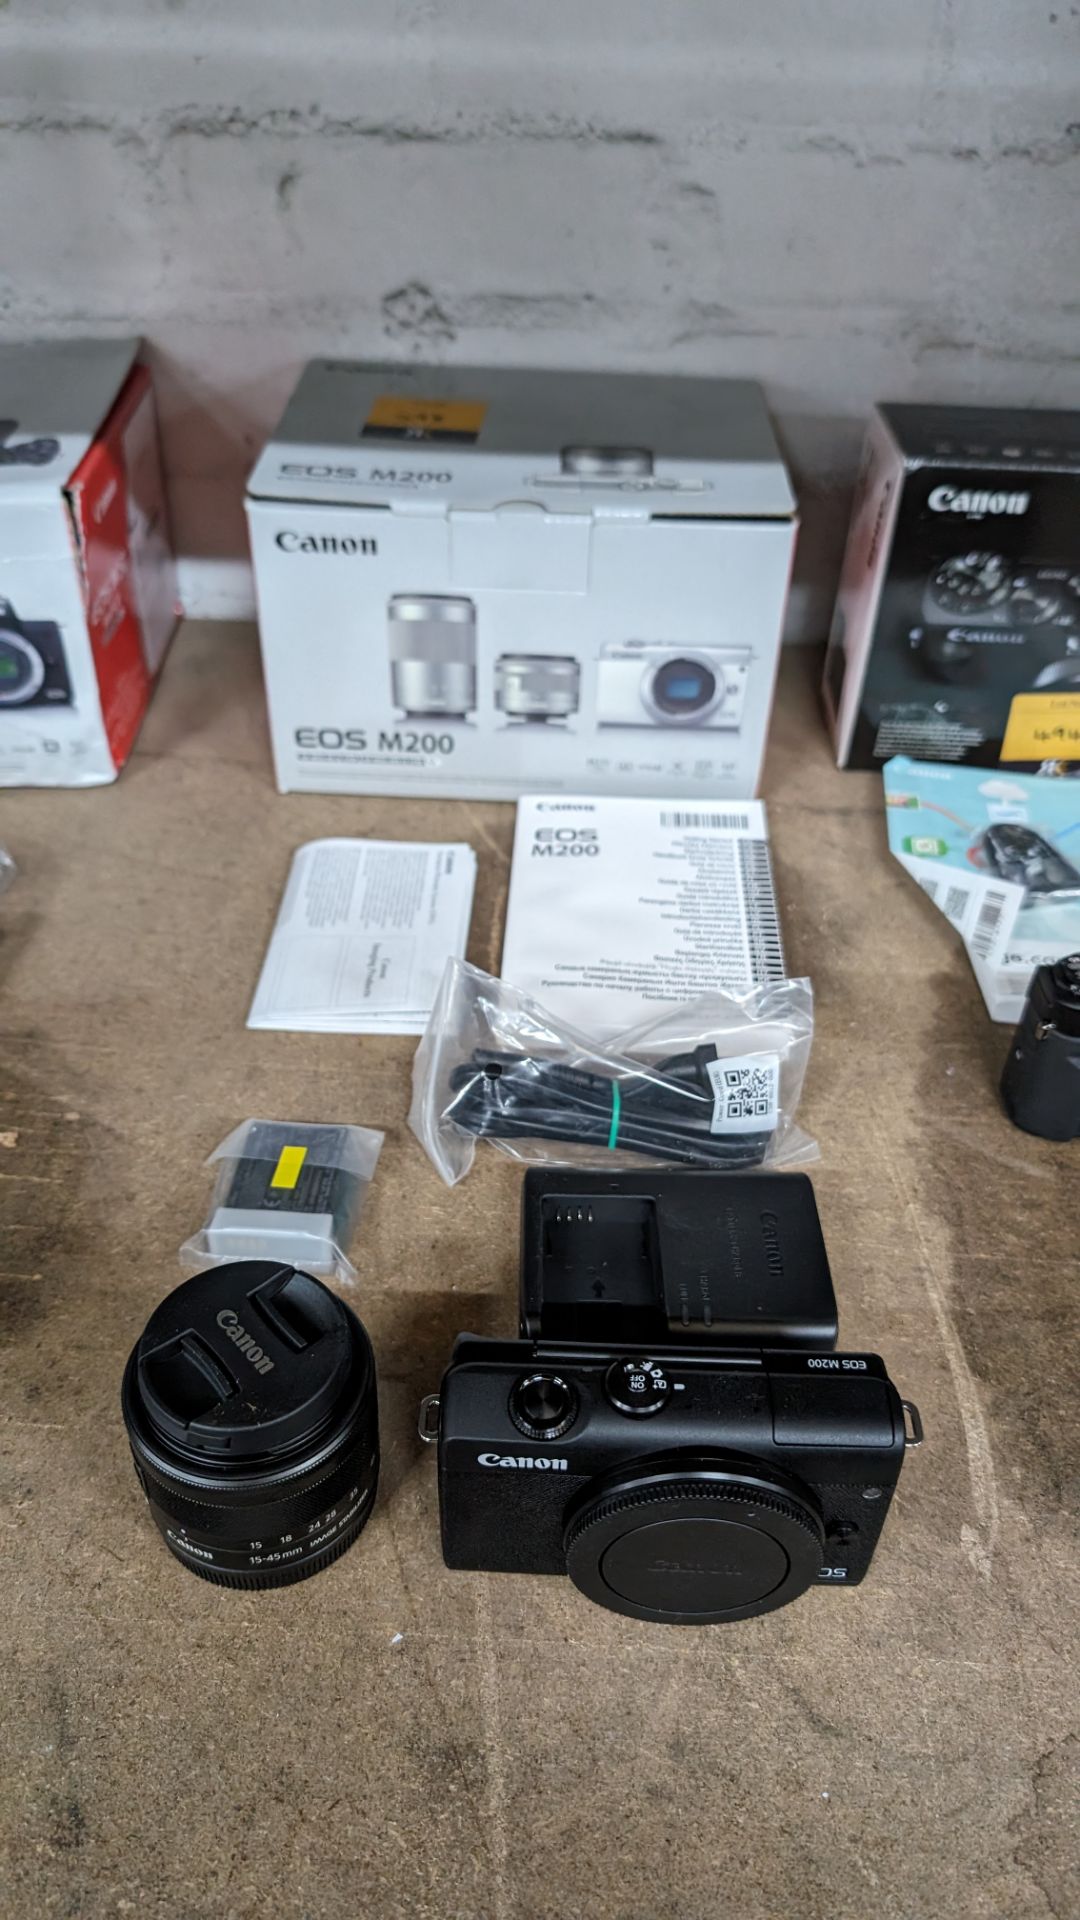 Canon EOS M200 camera kit, including 15-45mm image stabilizer lens, plus battery and charger